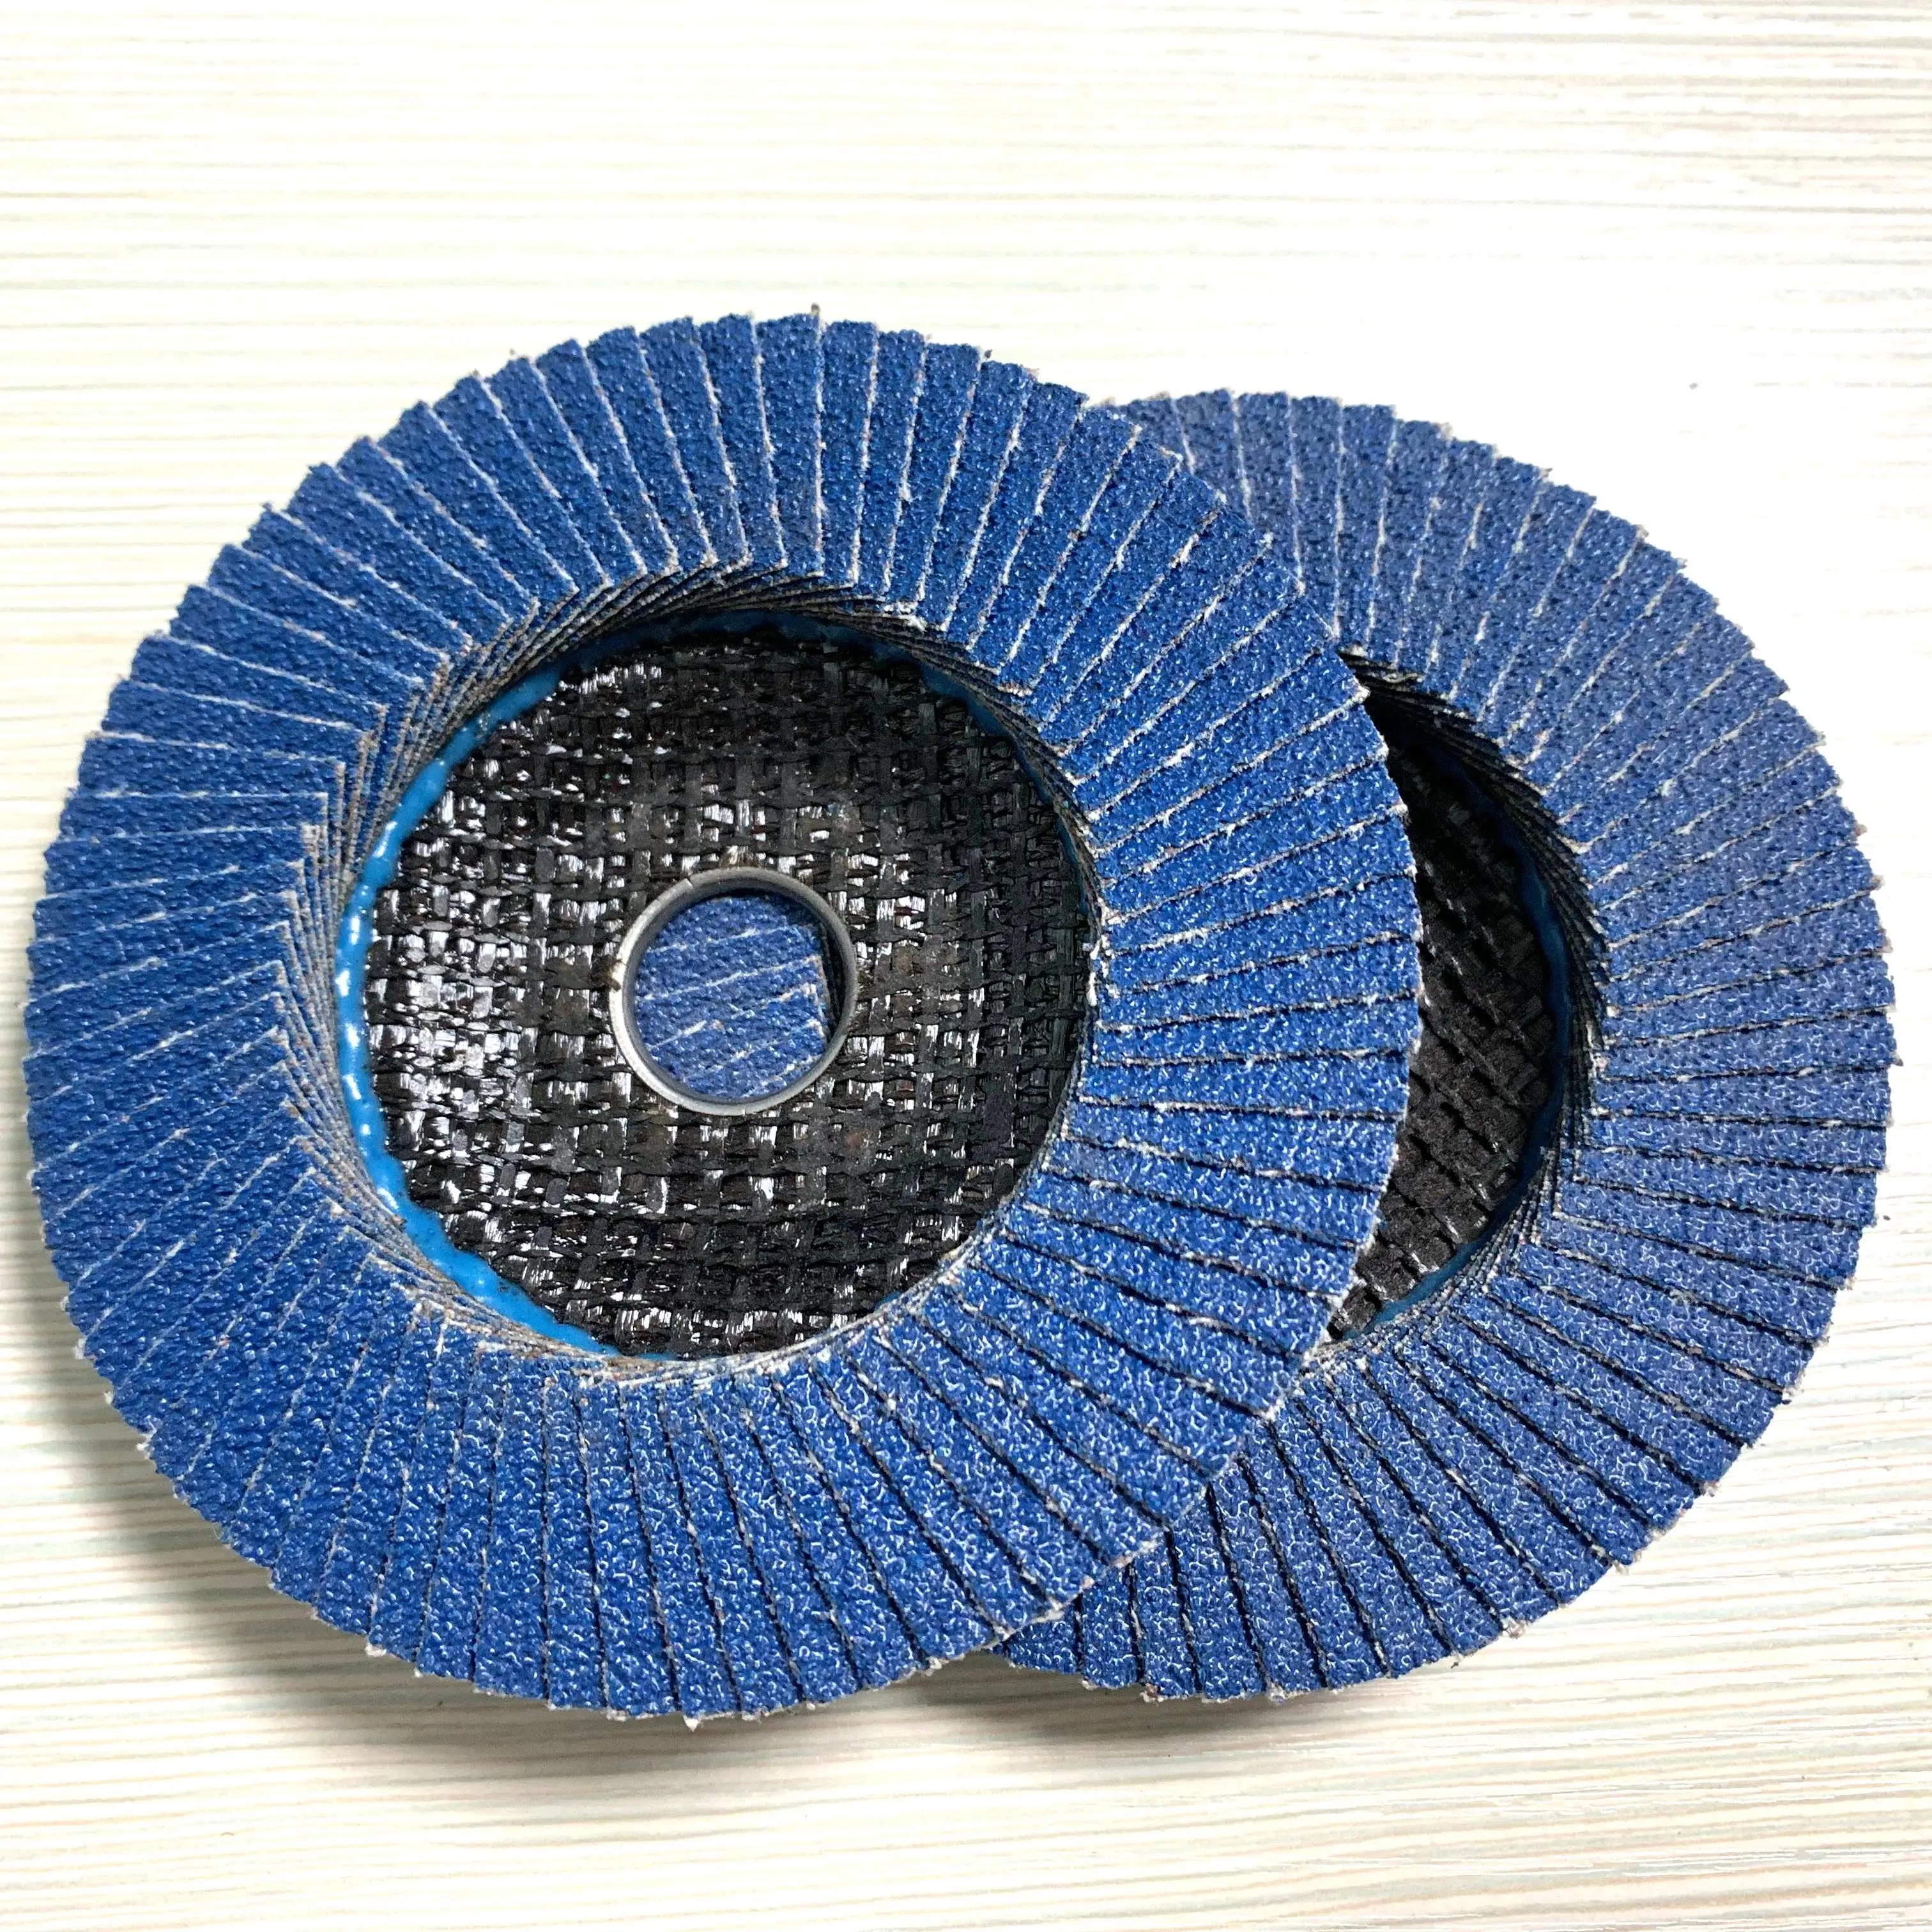 Hot Sale Abrasive Tools Wheel Flap Disc For Metal Stainless Steel Polishing Cheap Price Alumina Abrasive Flap Disc For Grinding